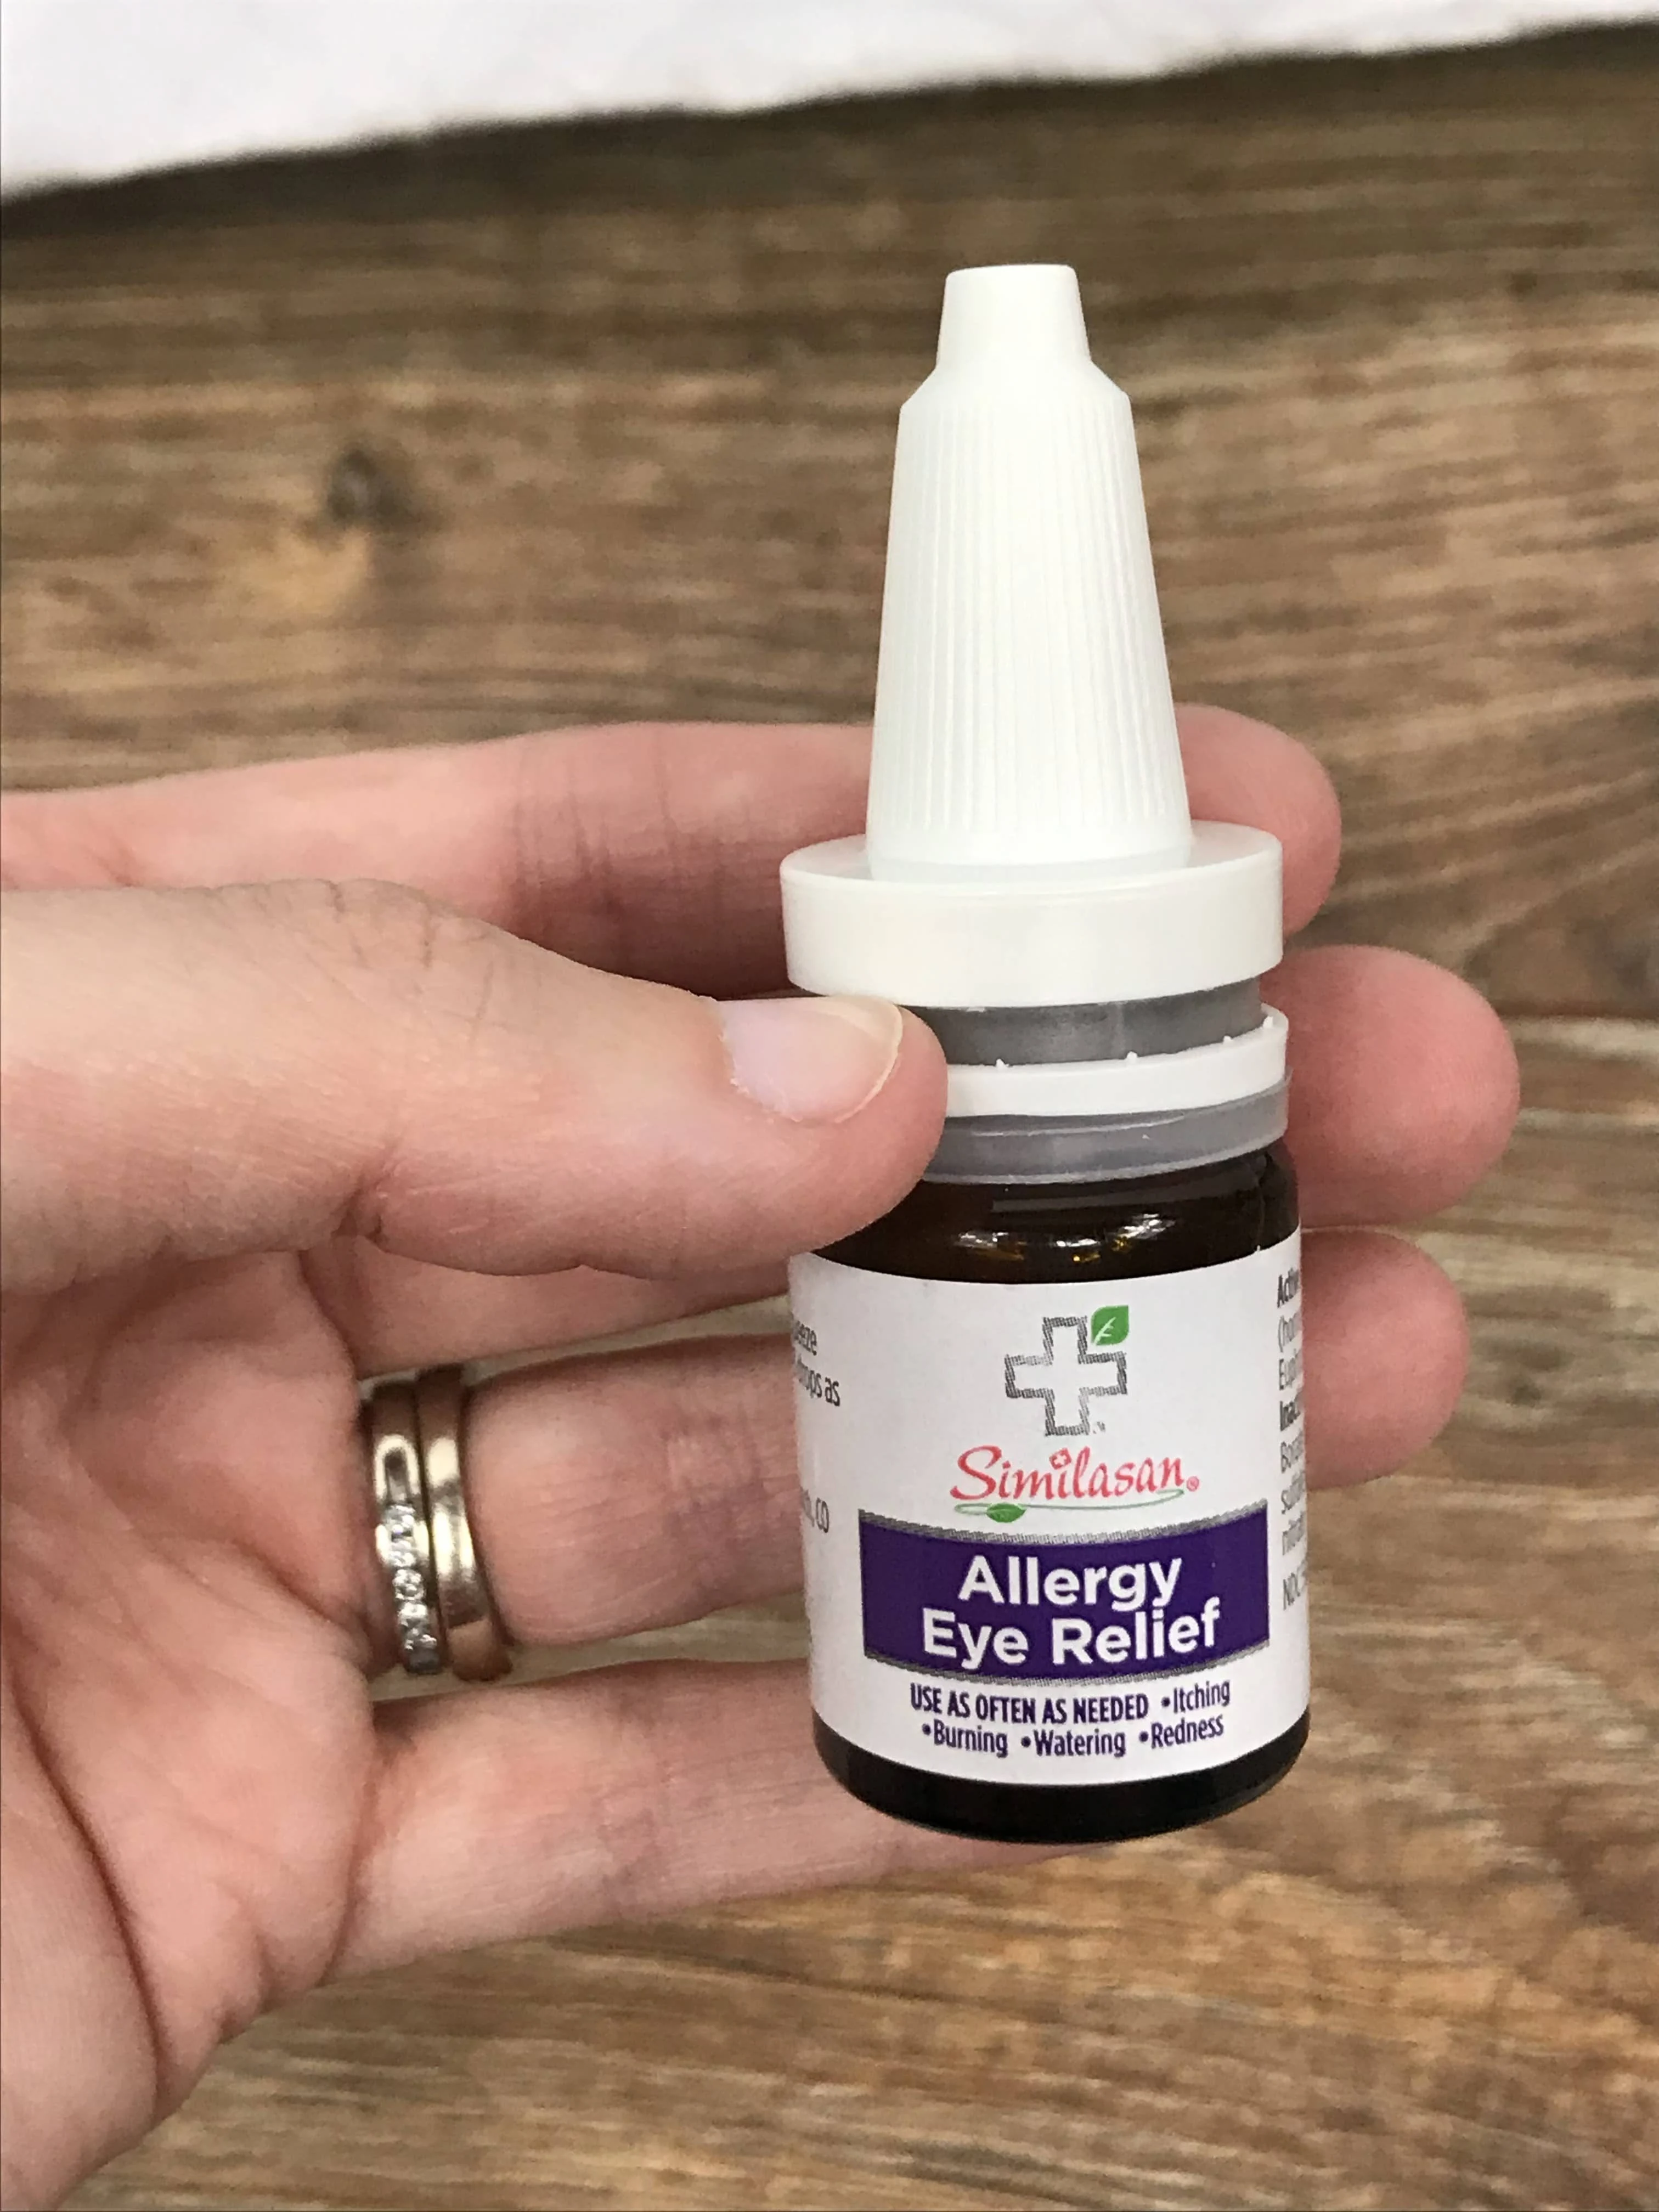 Effective Allergy Relief with Similasan!